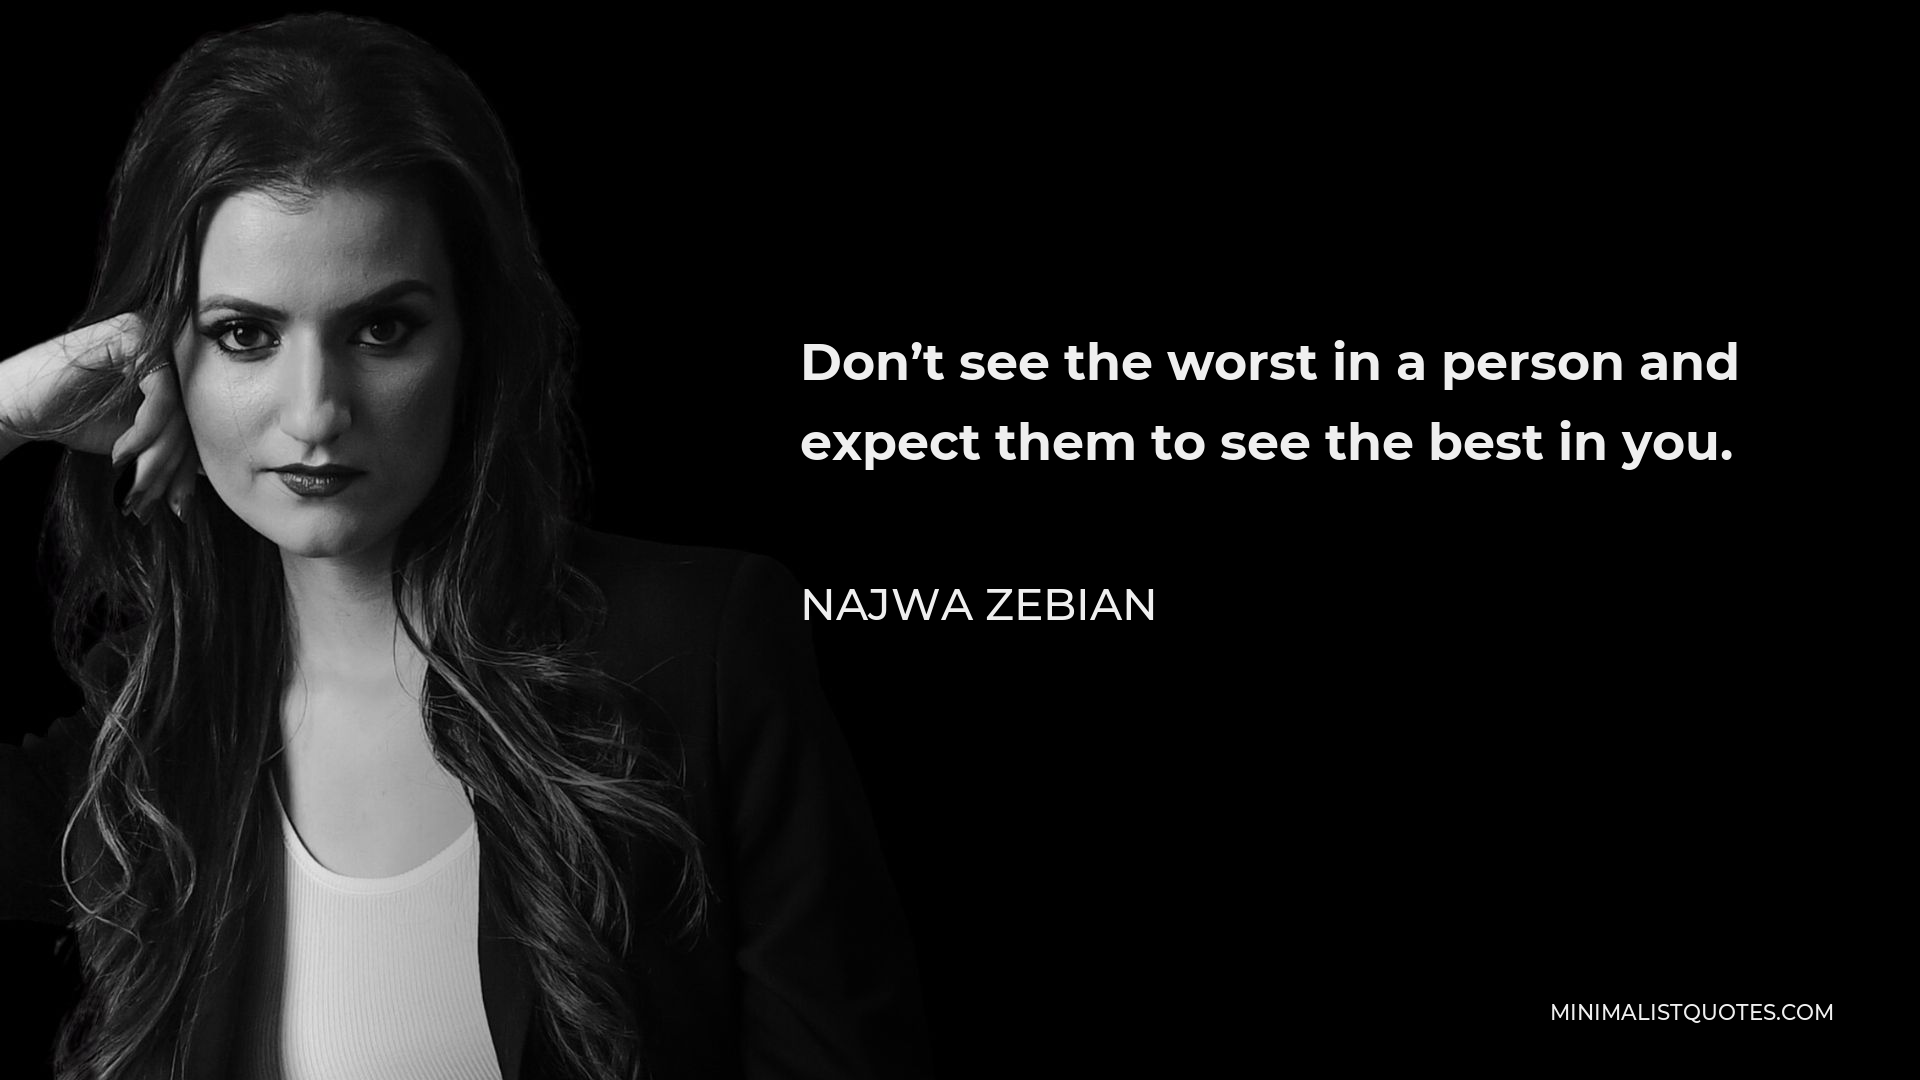 Najwa Zebian Quote - Don’t see the worst in a person and expect them to see the best in you.